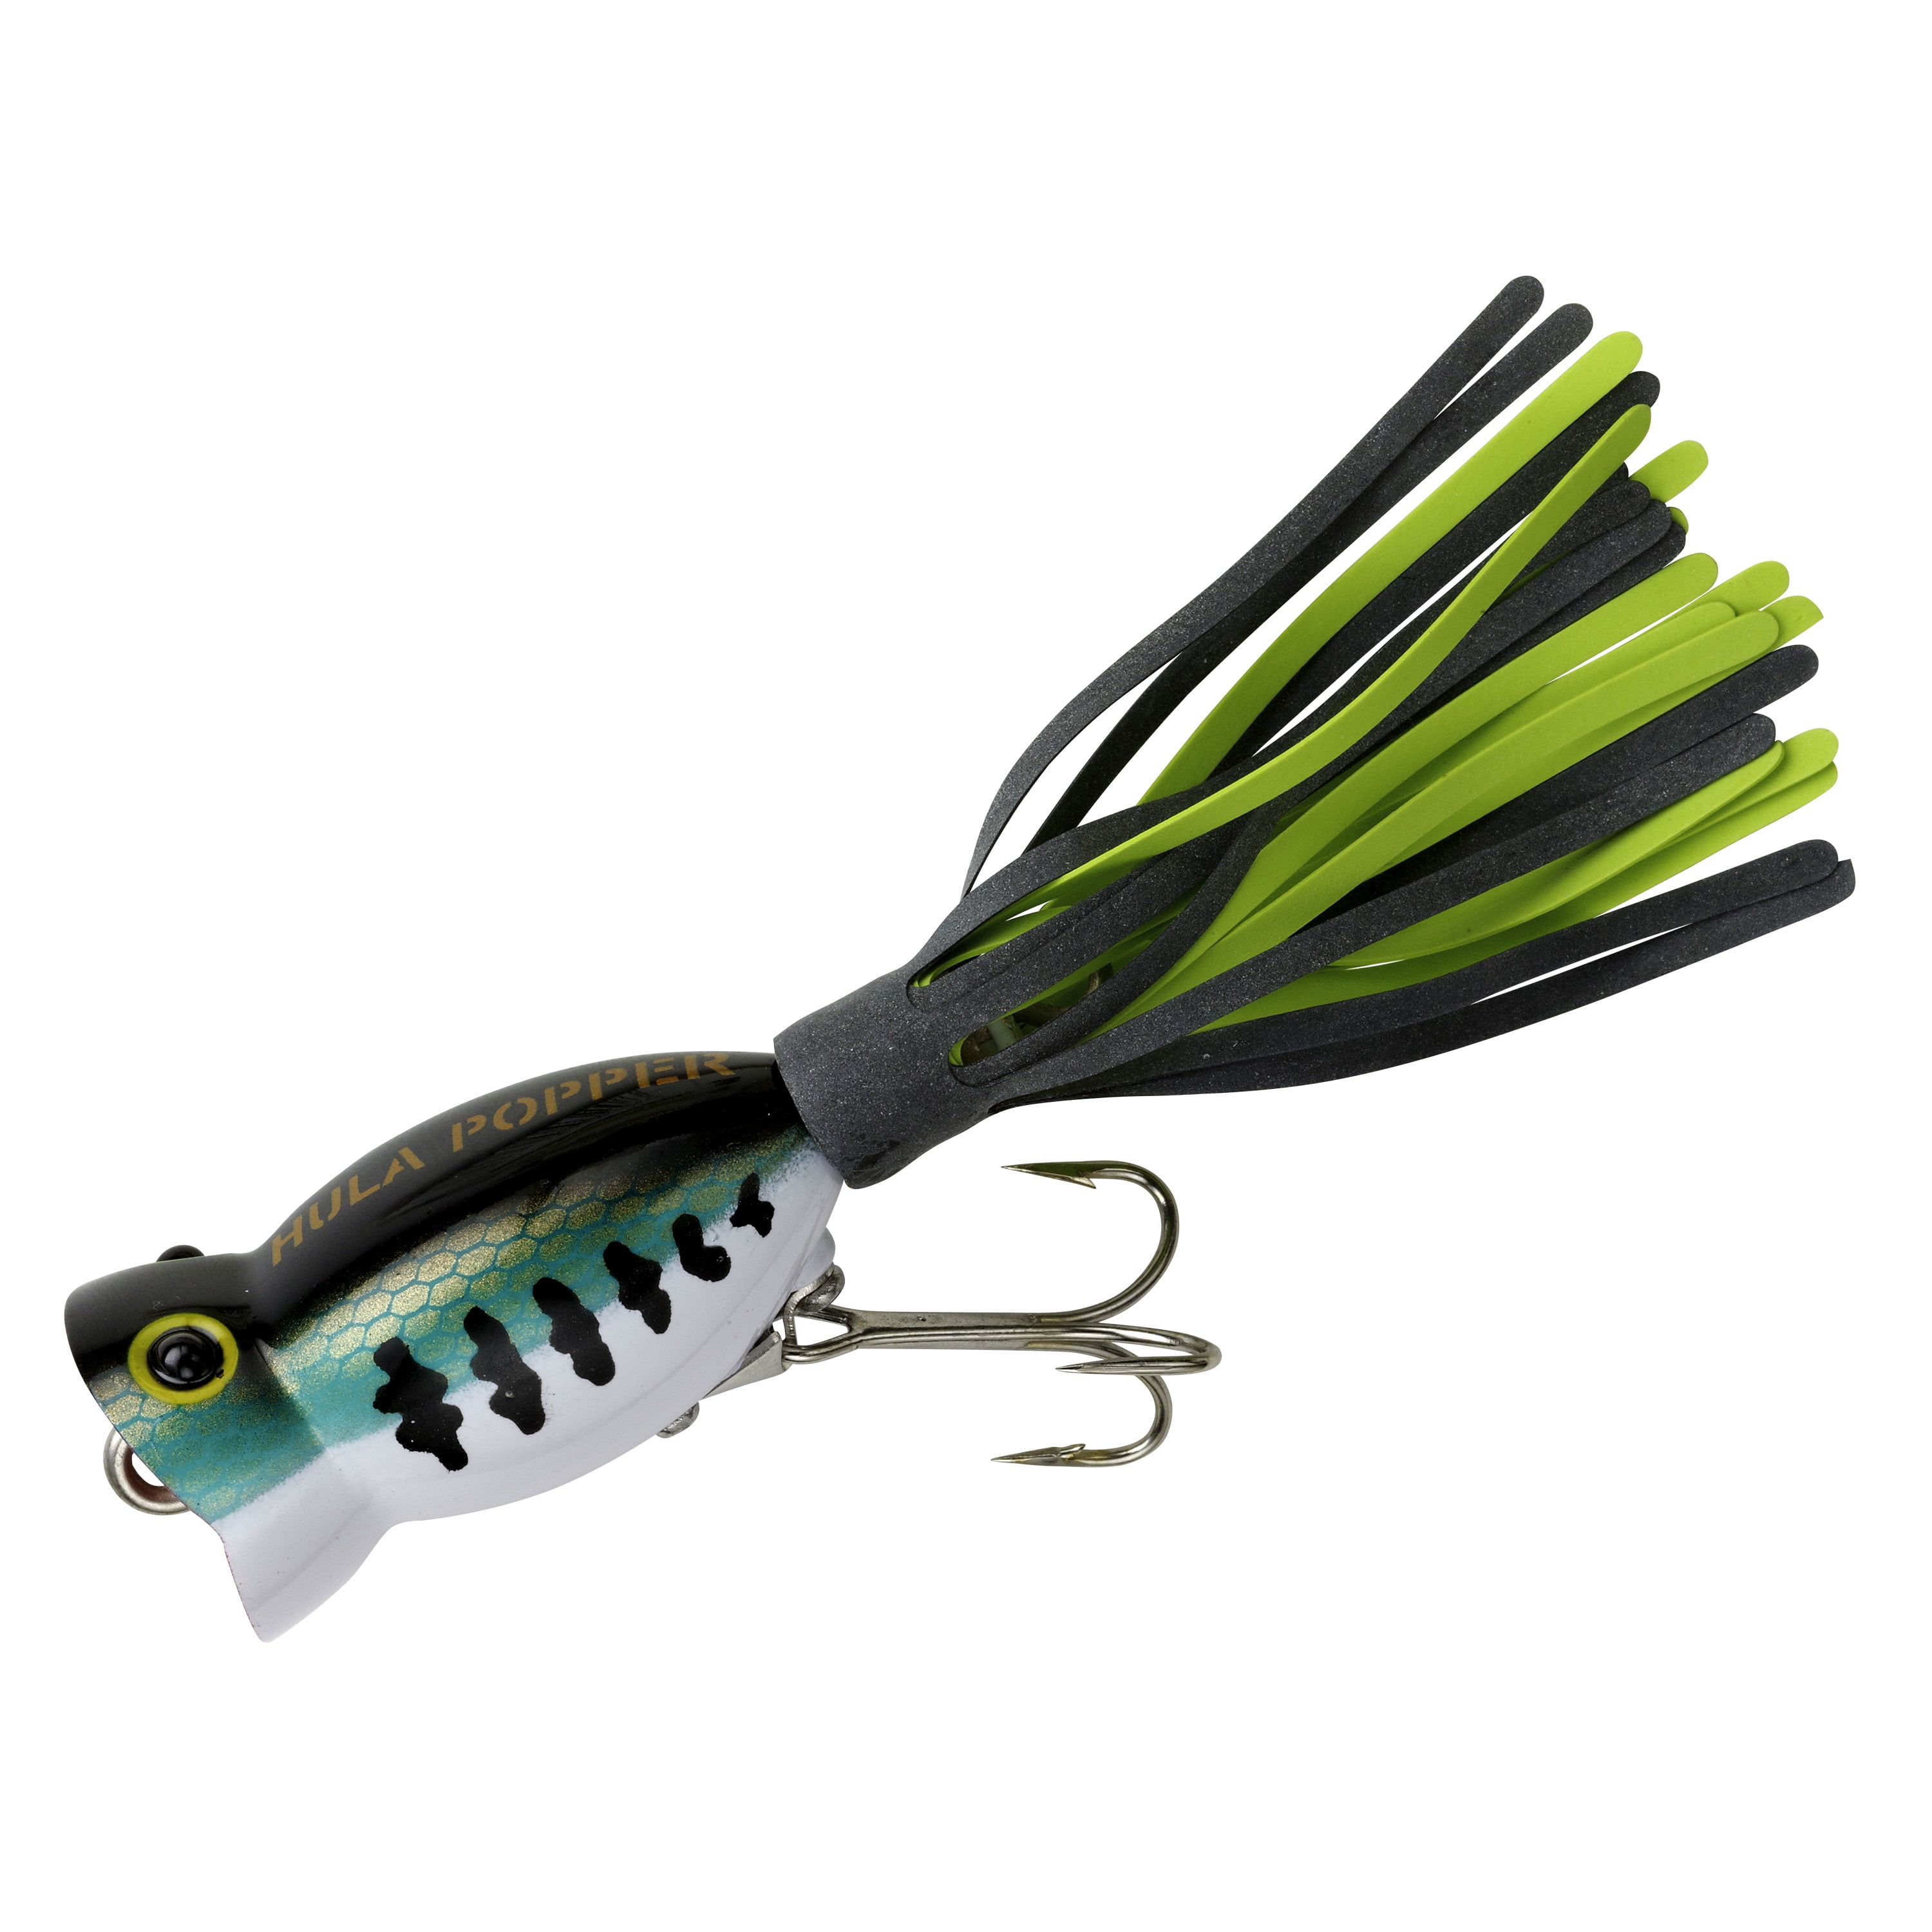 Tackle HD 12-Pack Lizard Fishing Lure, 6-Inch Soft Plastic Fishing Lures  for Bass Fishing, Bass Lures with Massive Curly Tail, Freshwater Lizard